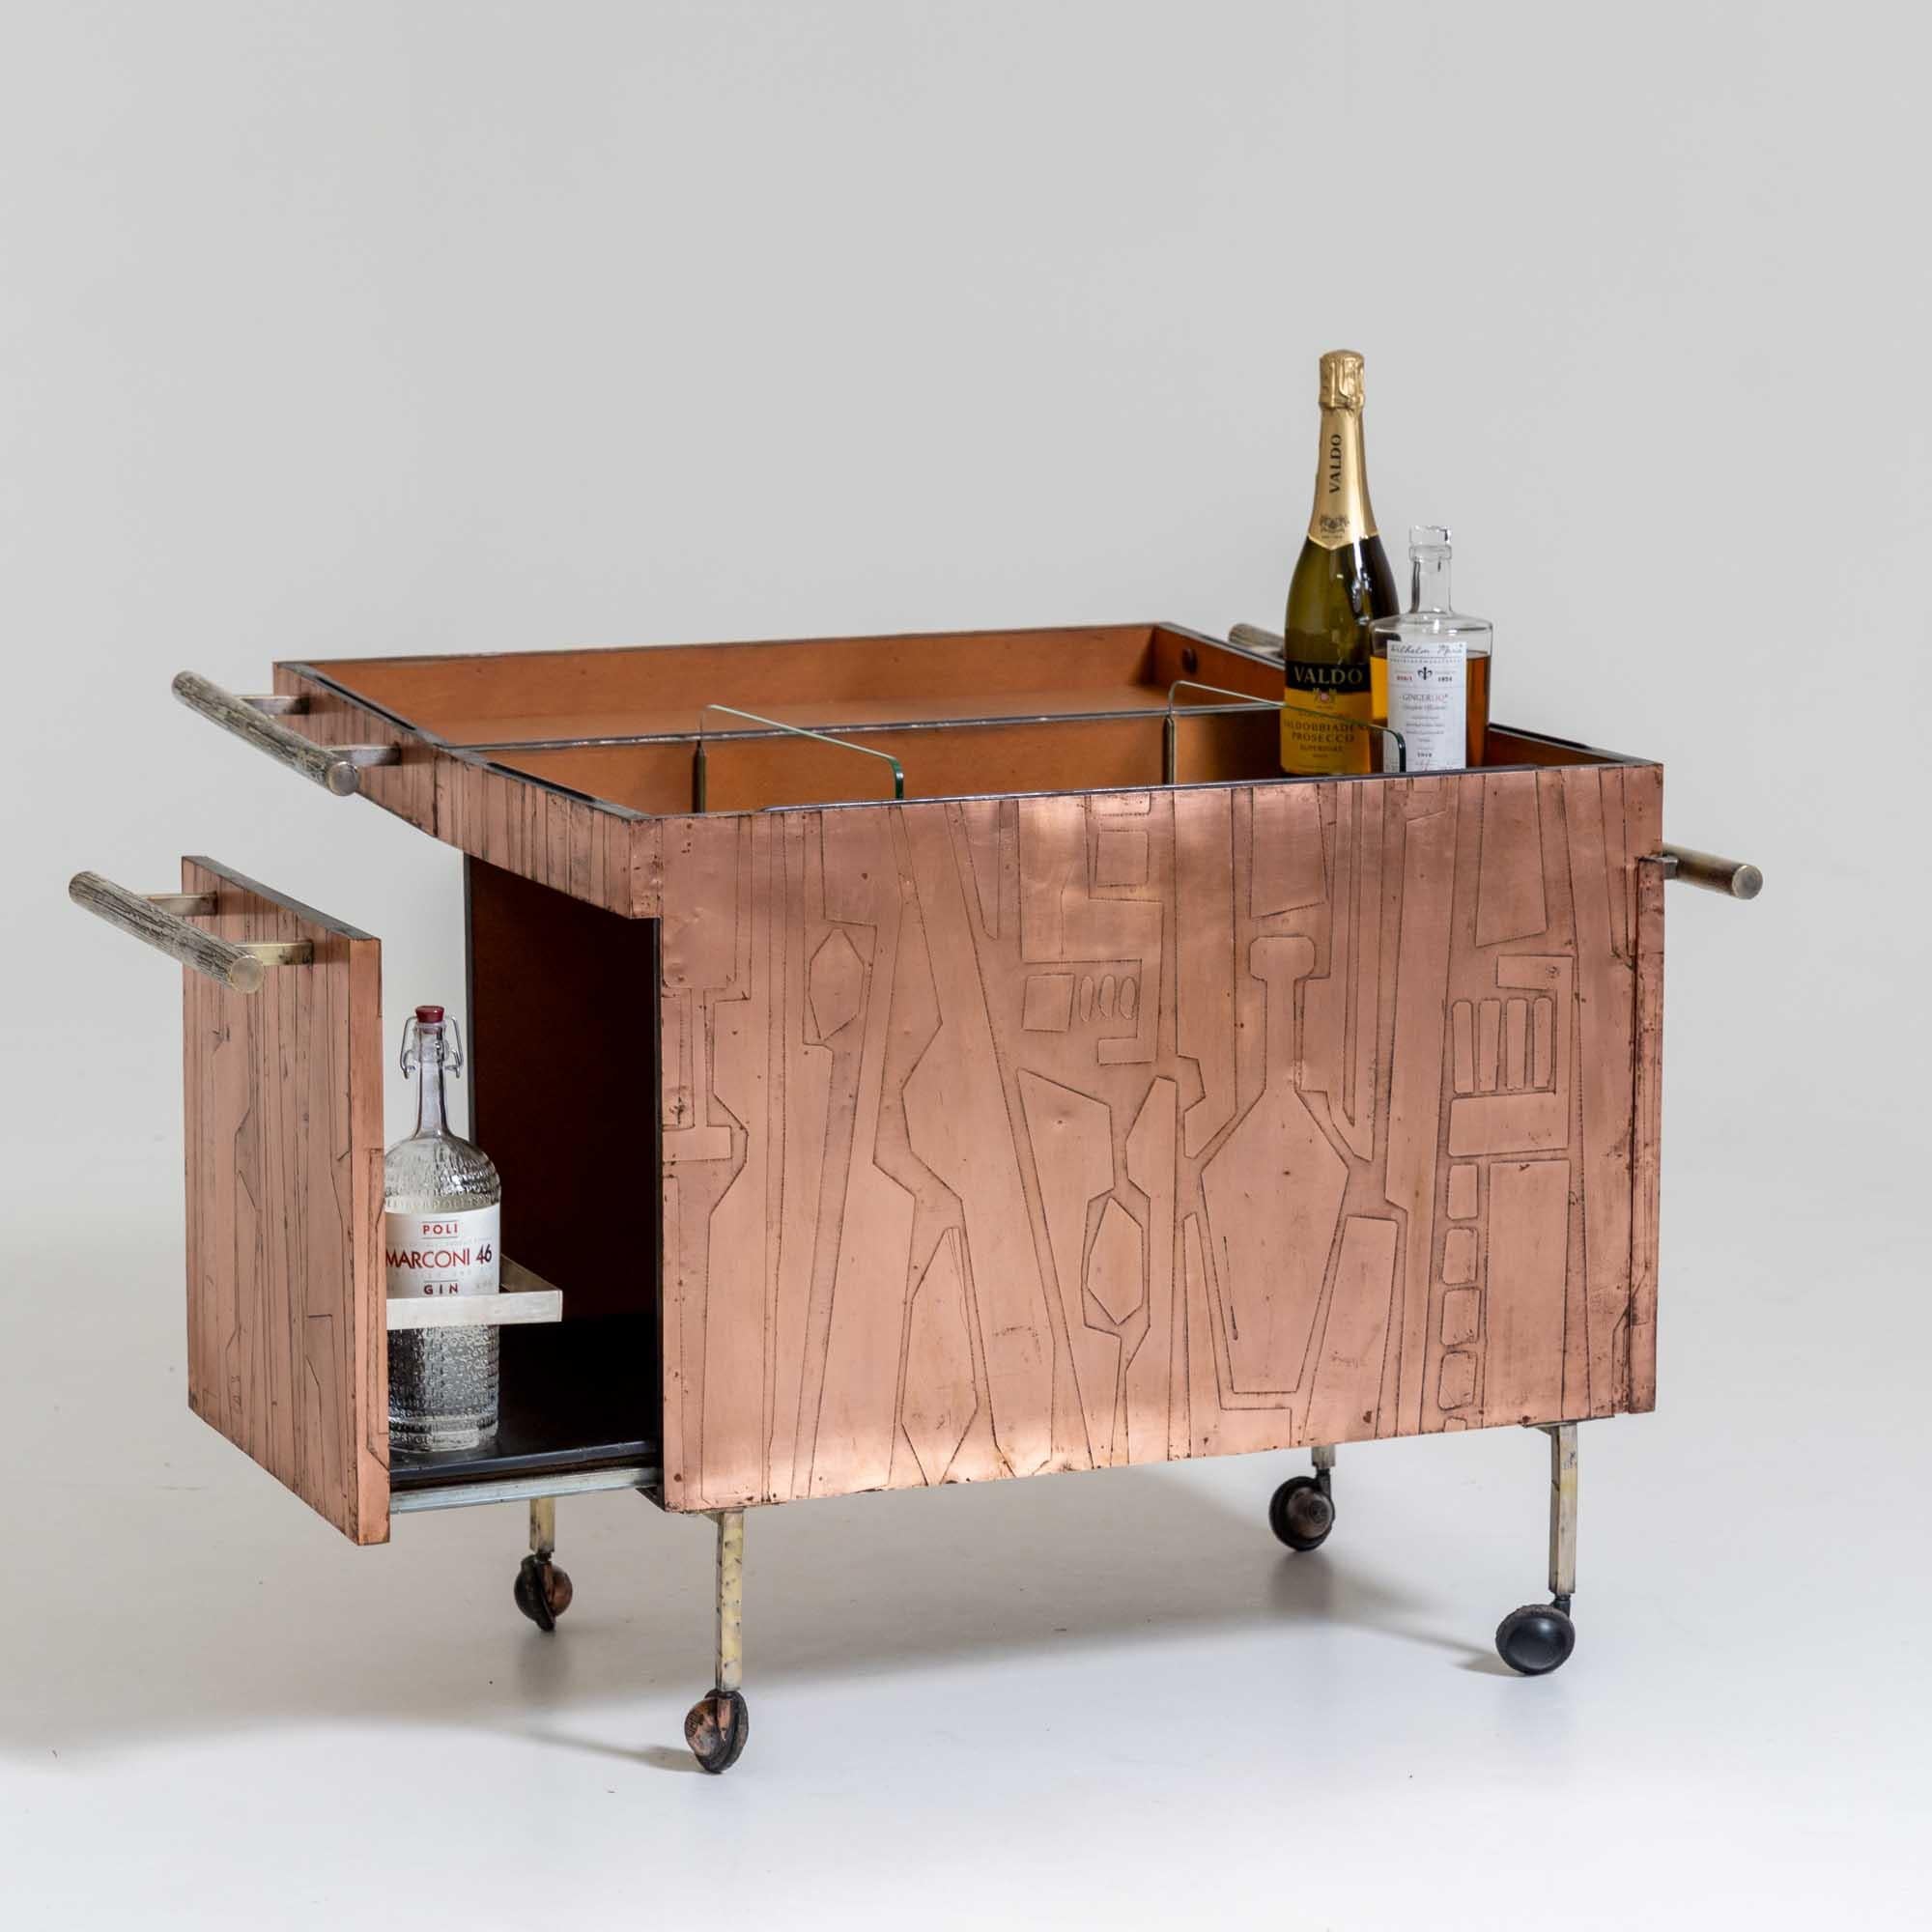 A Modernist Copper bar cart with abstract cocktail motif covering the exterior.
Featuring a flip-up top and two pull out sides for additional storage.